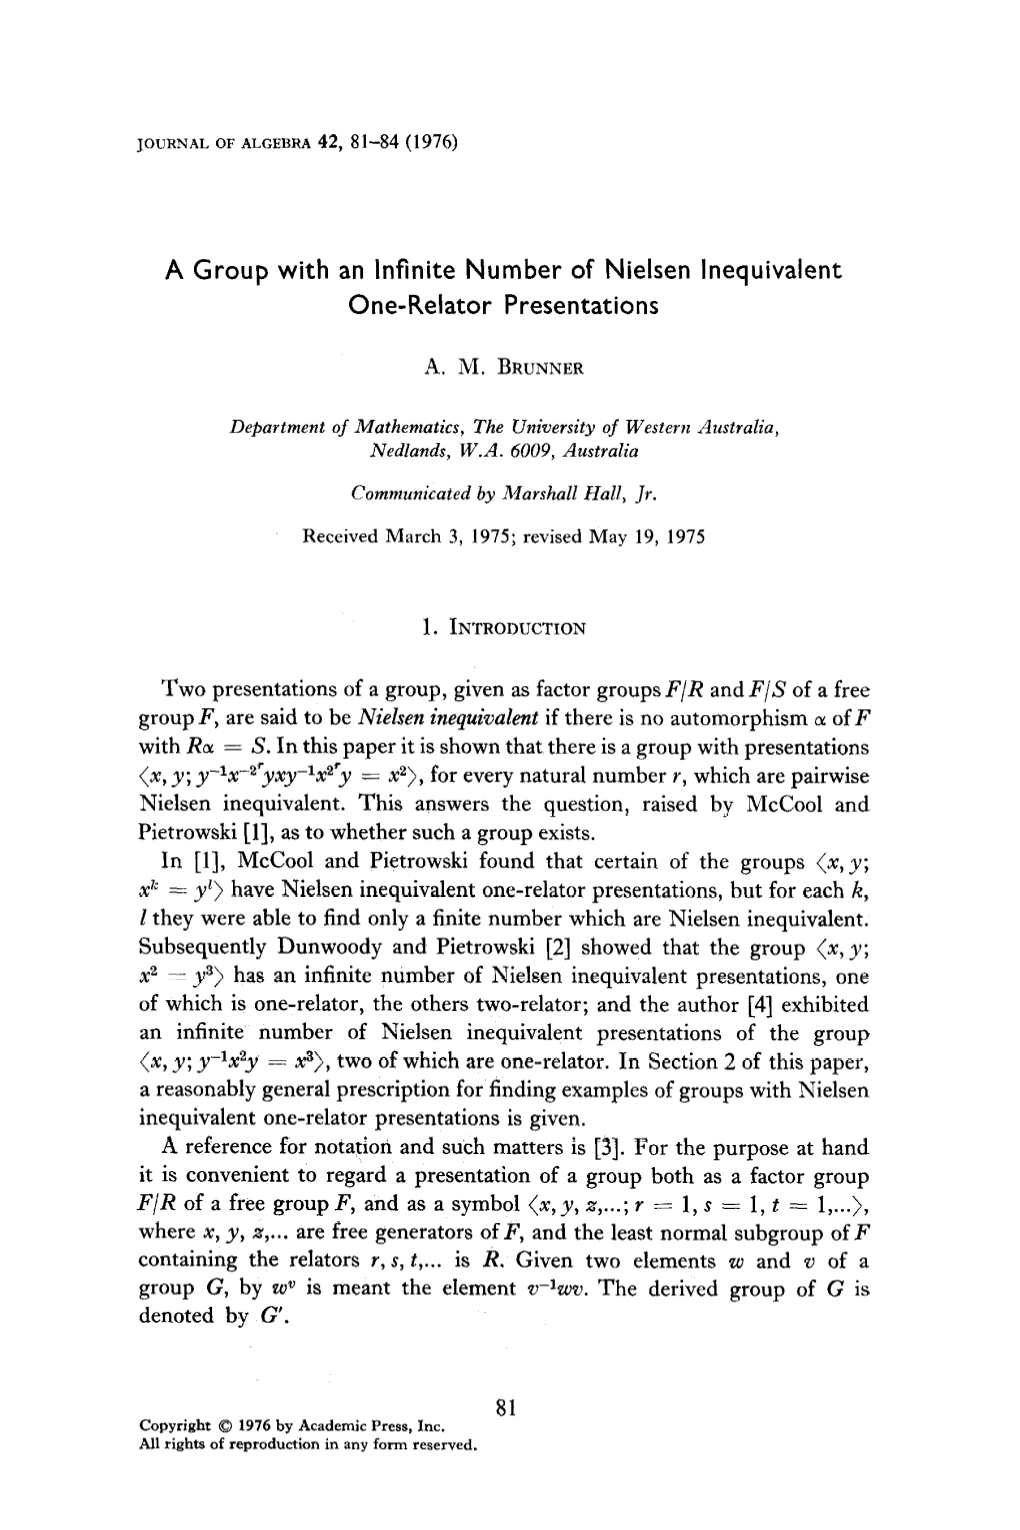 A Group with an Infinite Number of Nielsen Inequivalent One-Relator Presentations